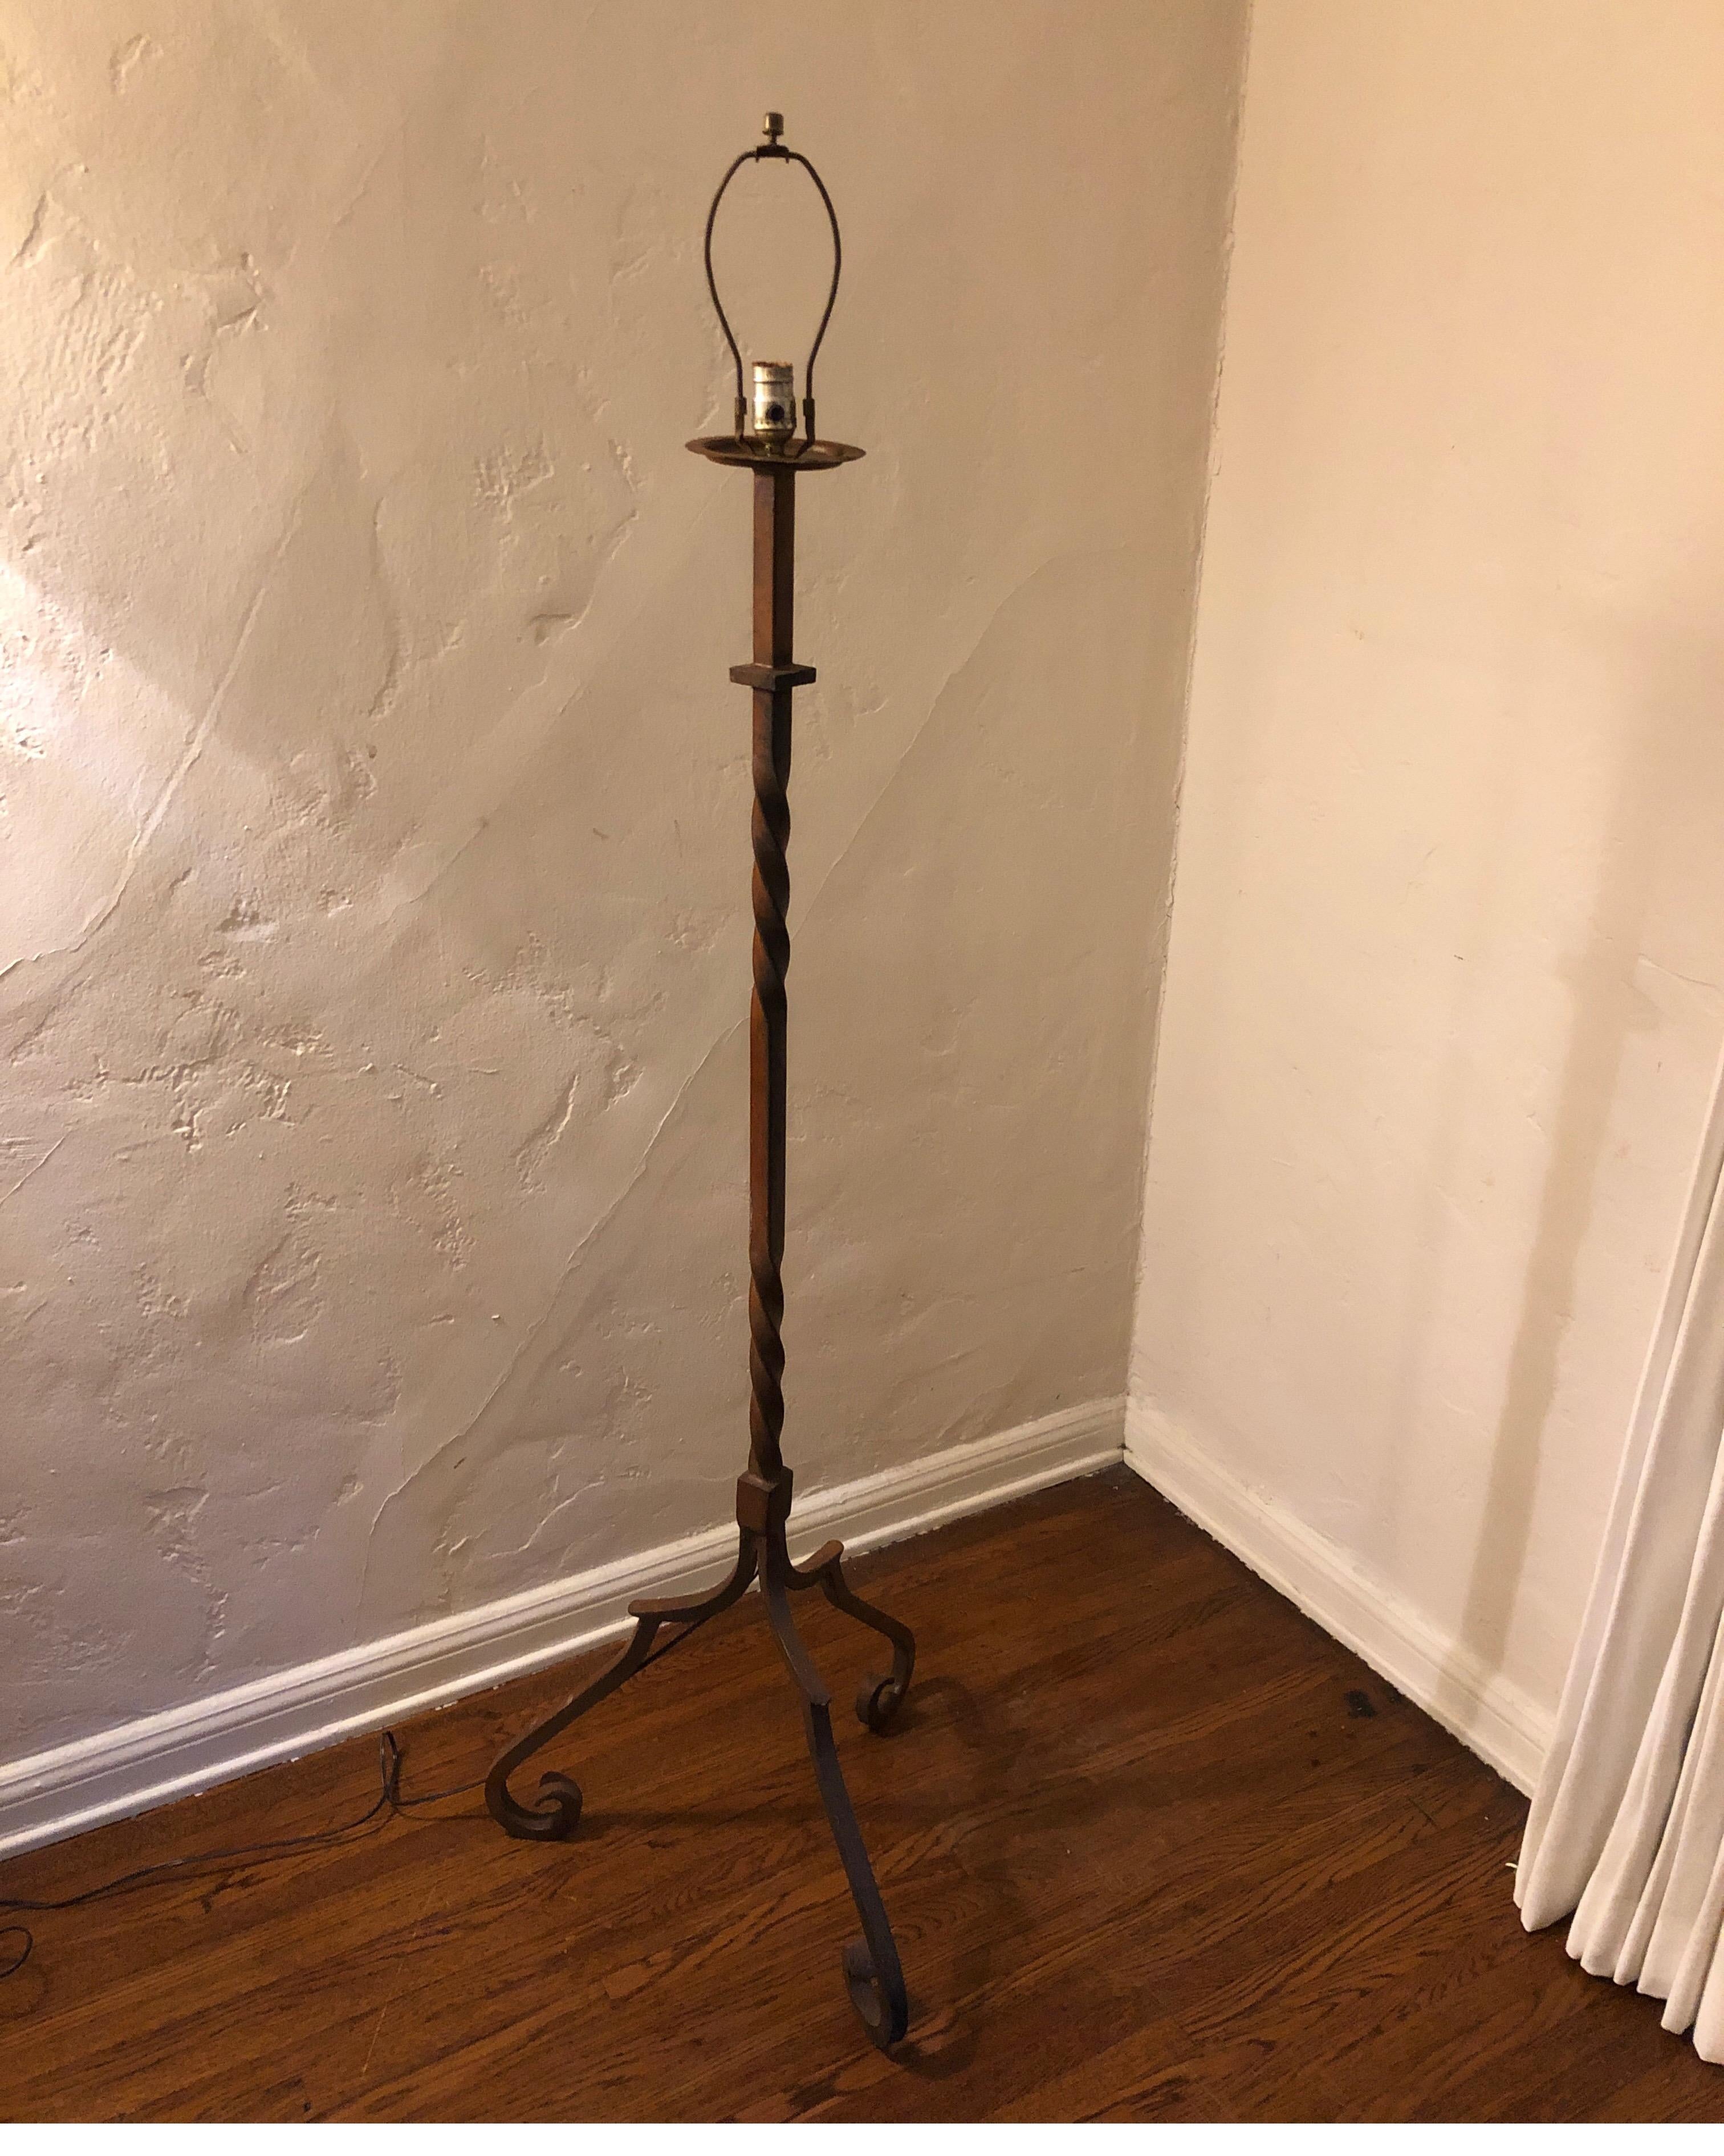 Heavy hand gilded wrought iron twisted Spanish floor lamp. 
Stands on tripod curved legs.

Shade shown for display only and not included.